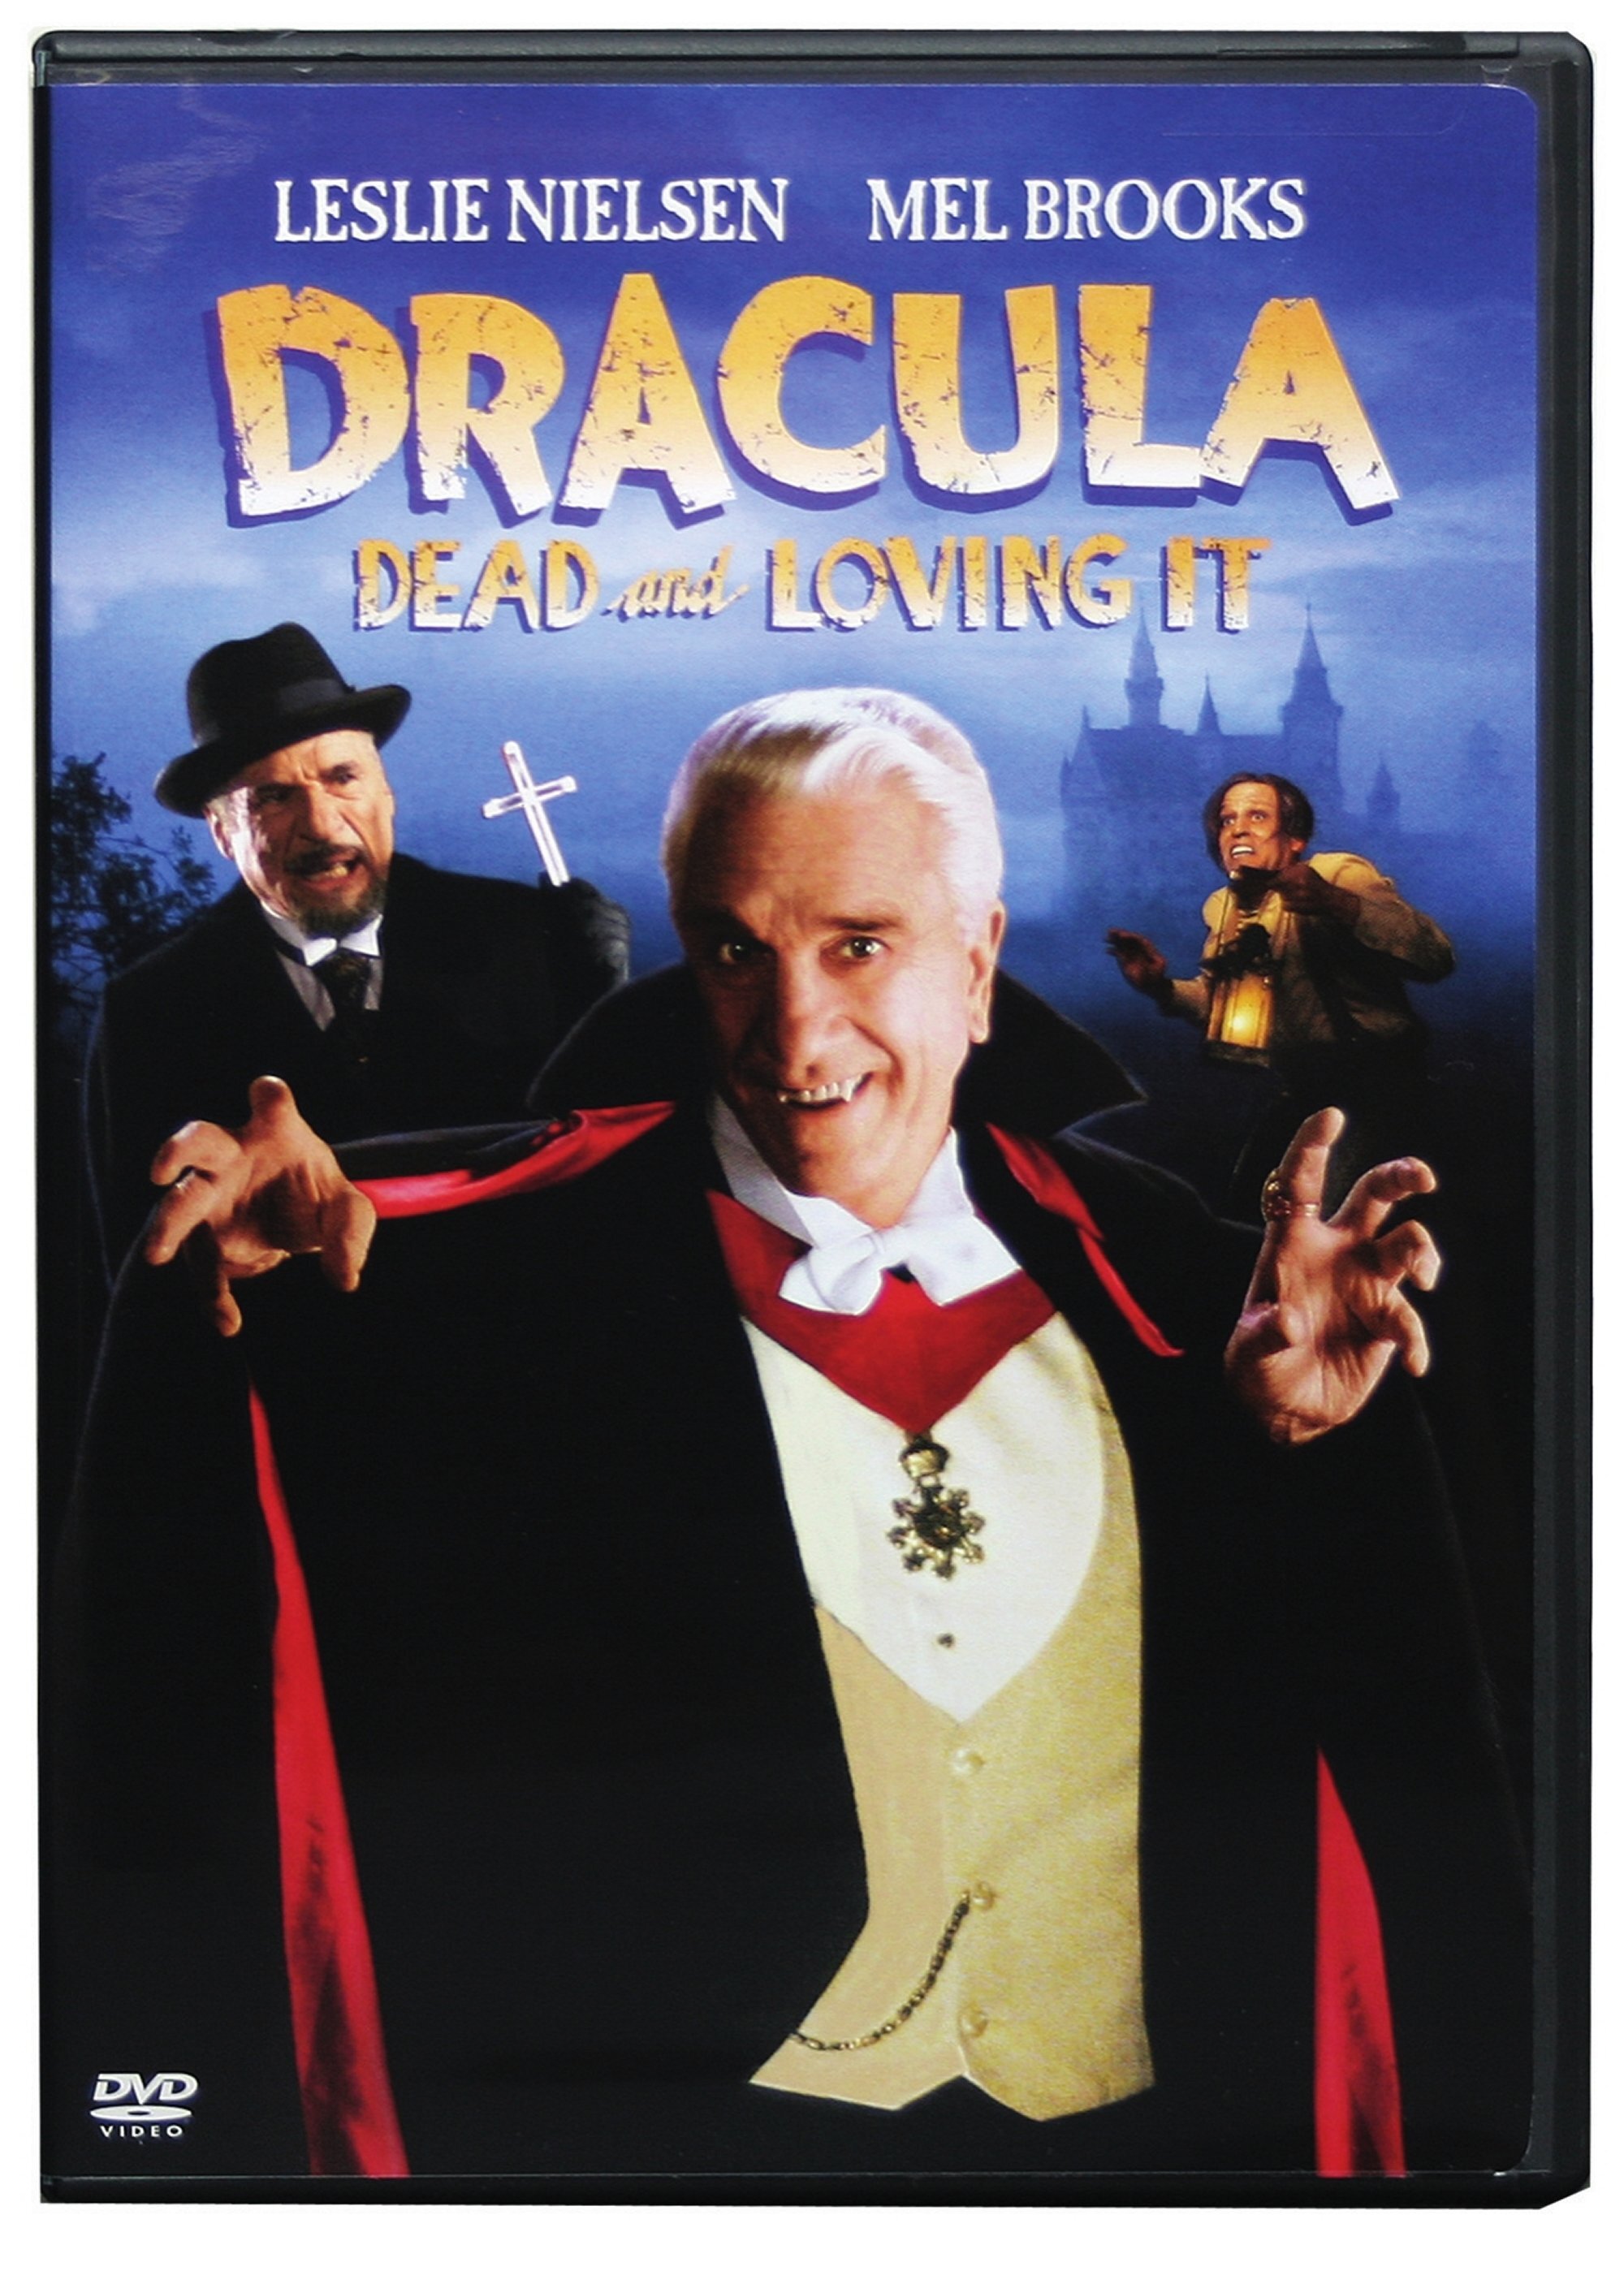 Dracula - Dead And Loving It - DVD [ 1995 ]  - Comedy Movies On DVD - Movies On GRUV